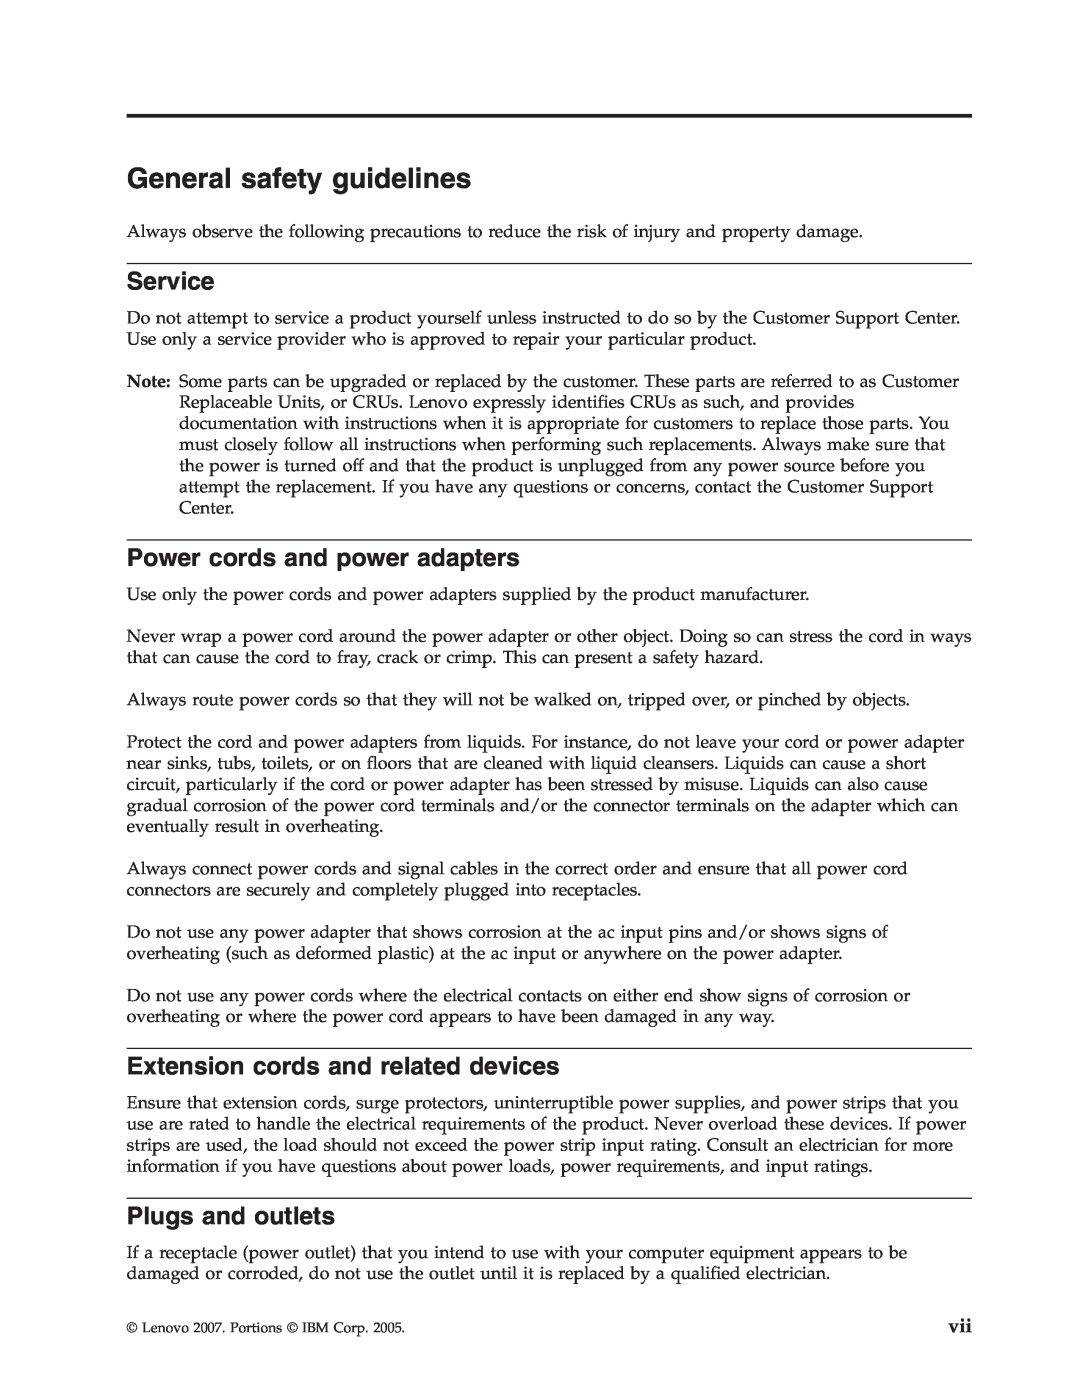 Lenovo 41N5647 General safety guidelines, Service, Power cords and power adapters, Extension cords and related devices 